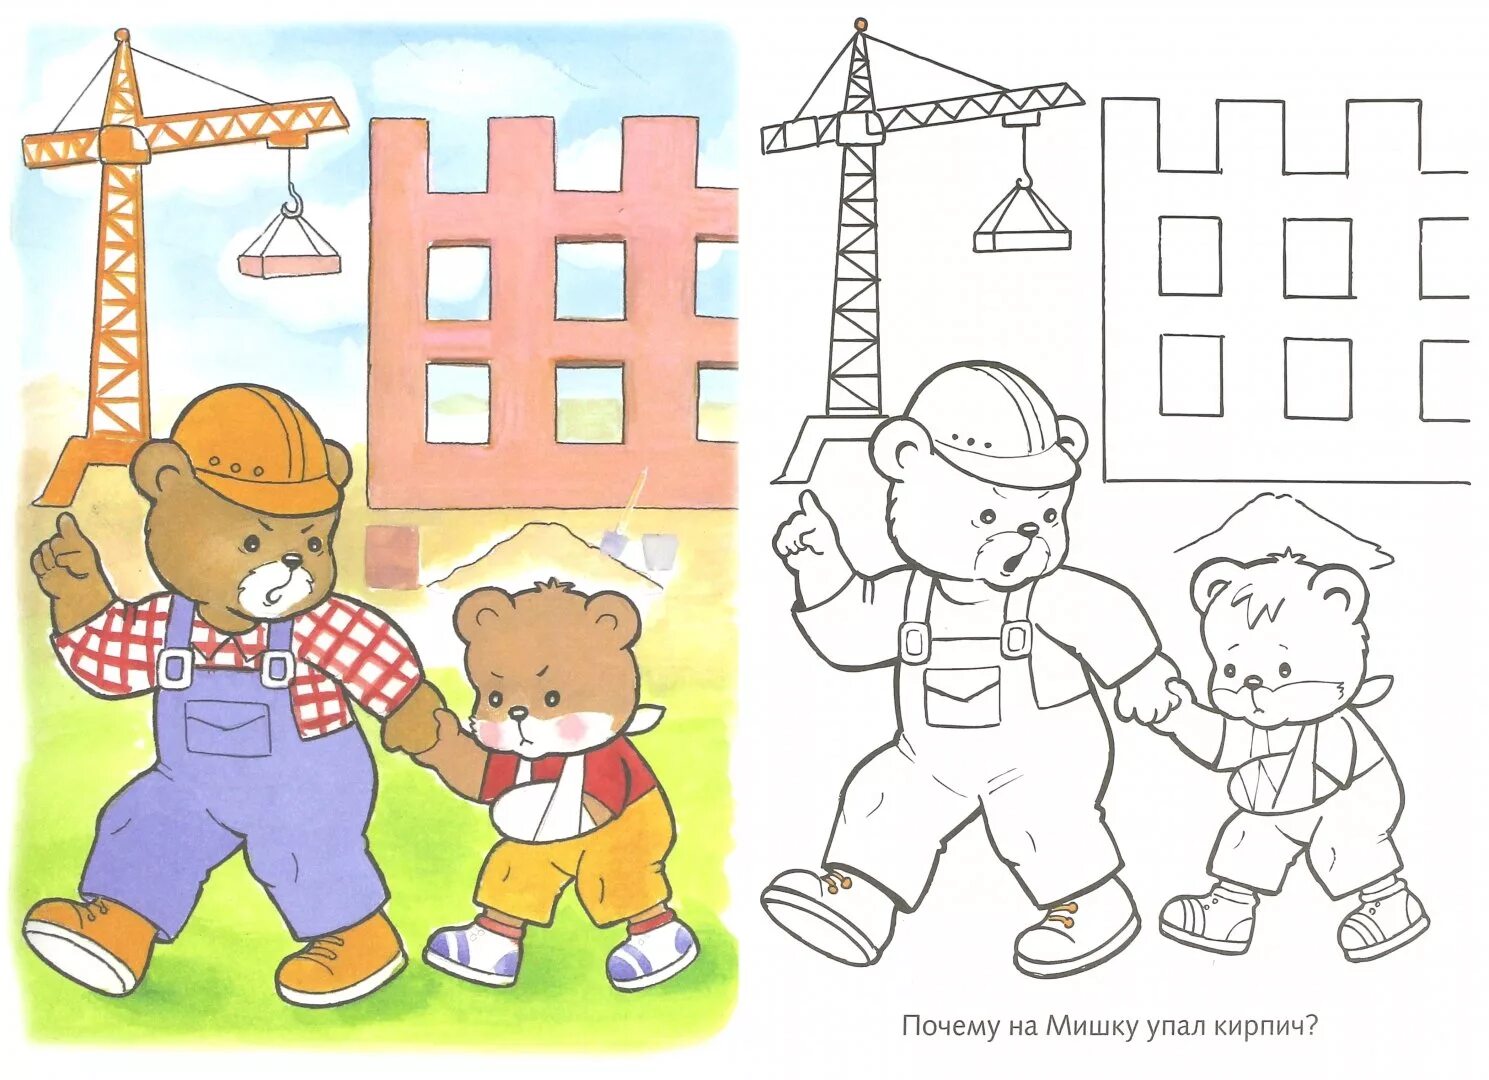 Occupational safety through the eyes of children for preschoolers #2